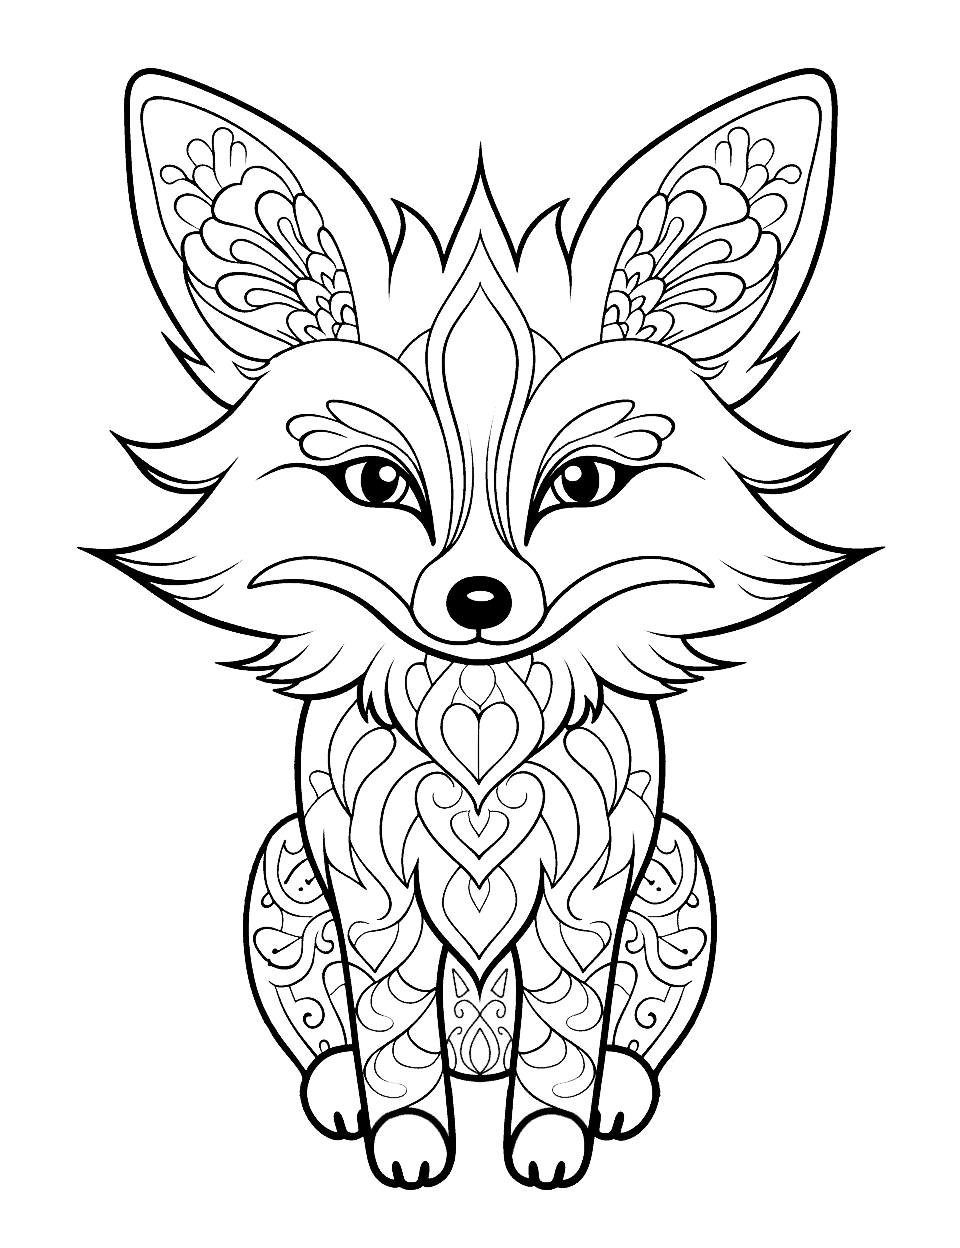 Fox Mandala Coloring Page - Beautiful mandala patterns forming the silhouette of a fox, perfect for mindfulness coloring.